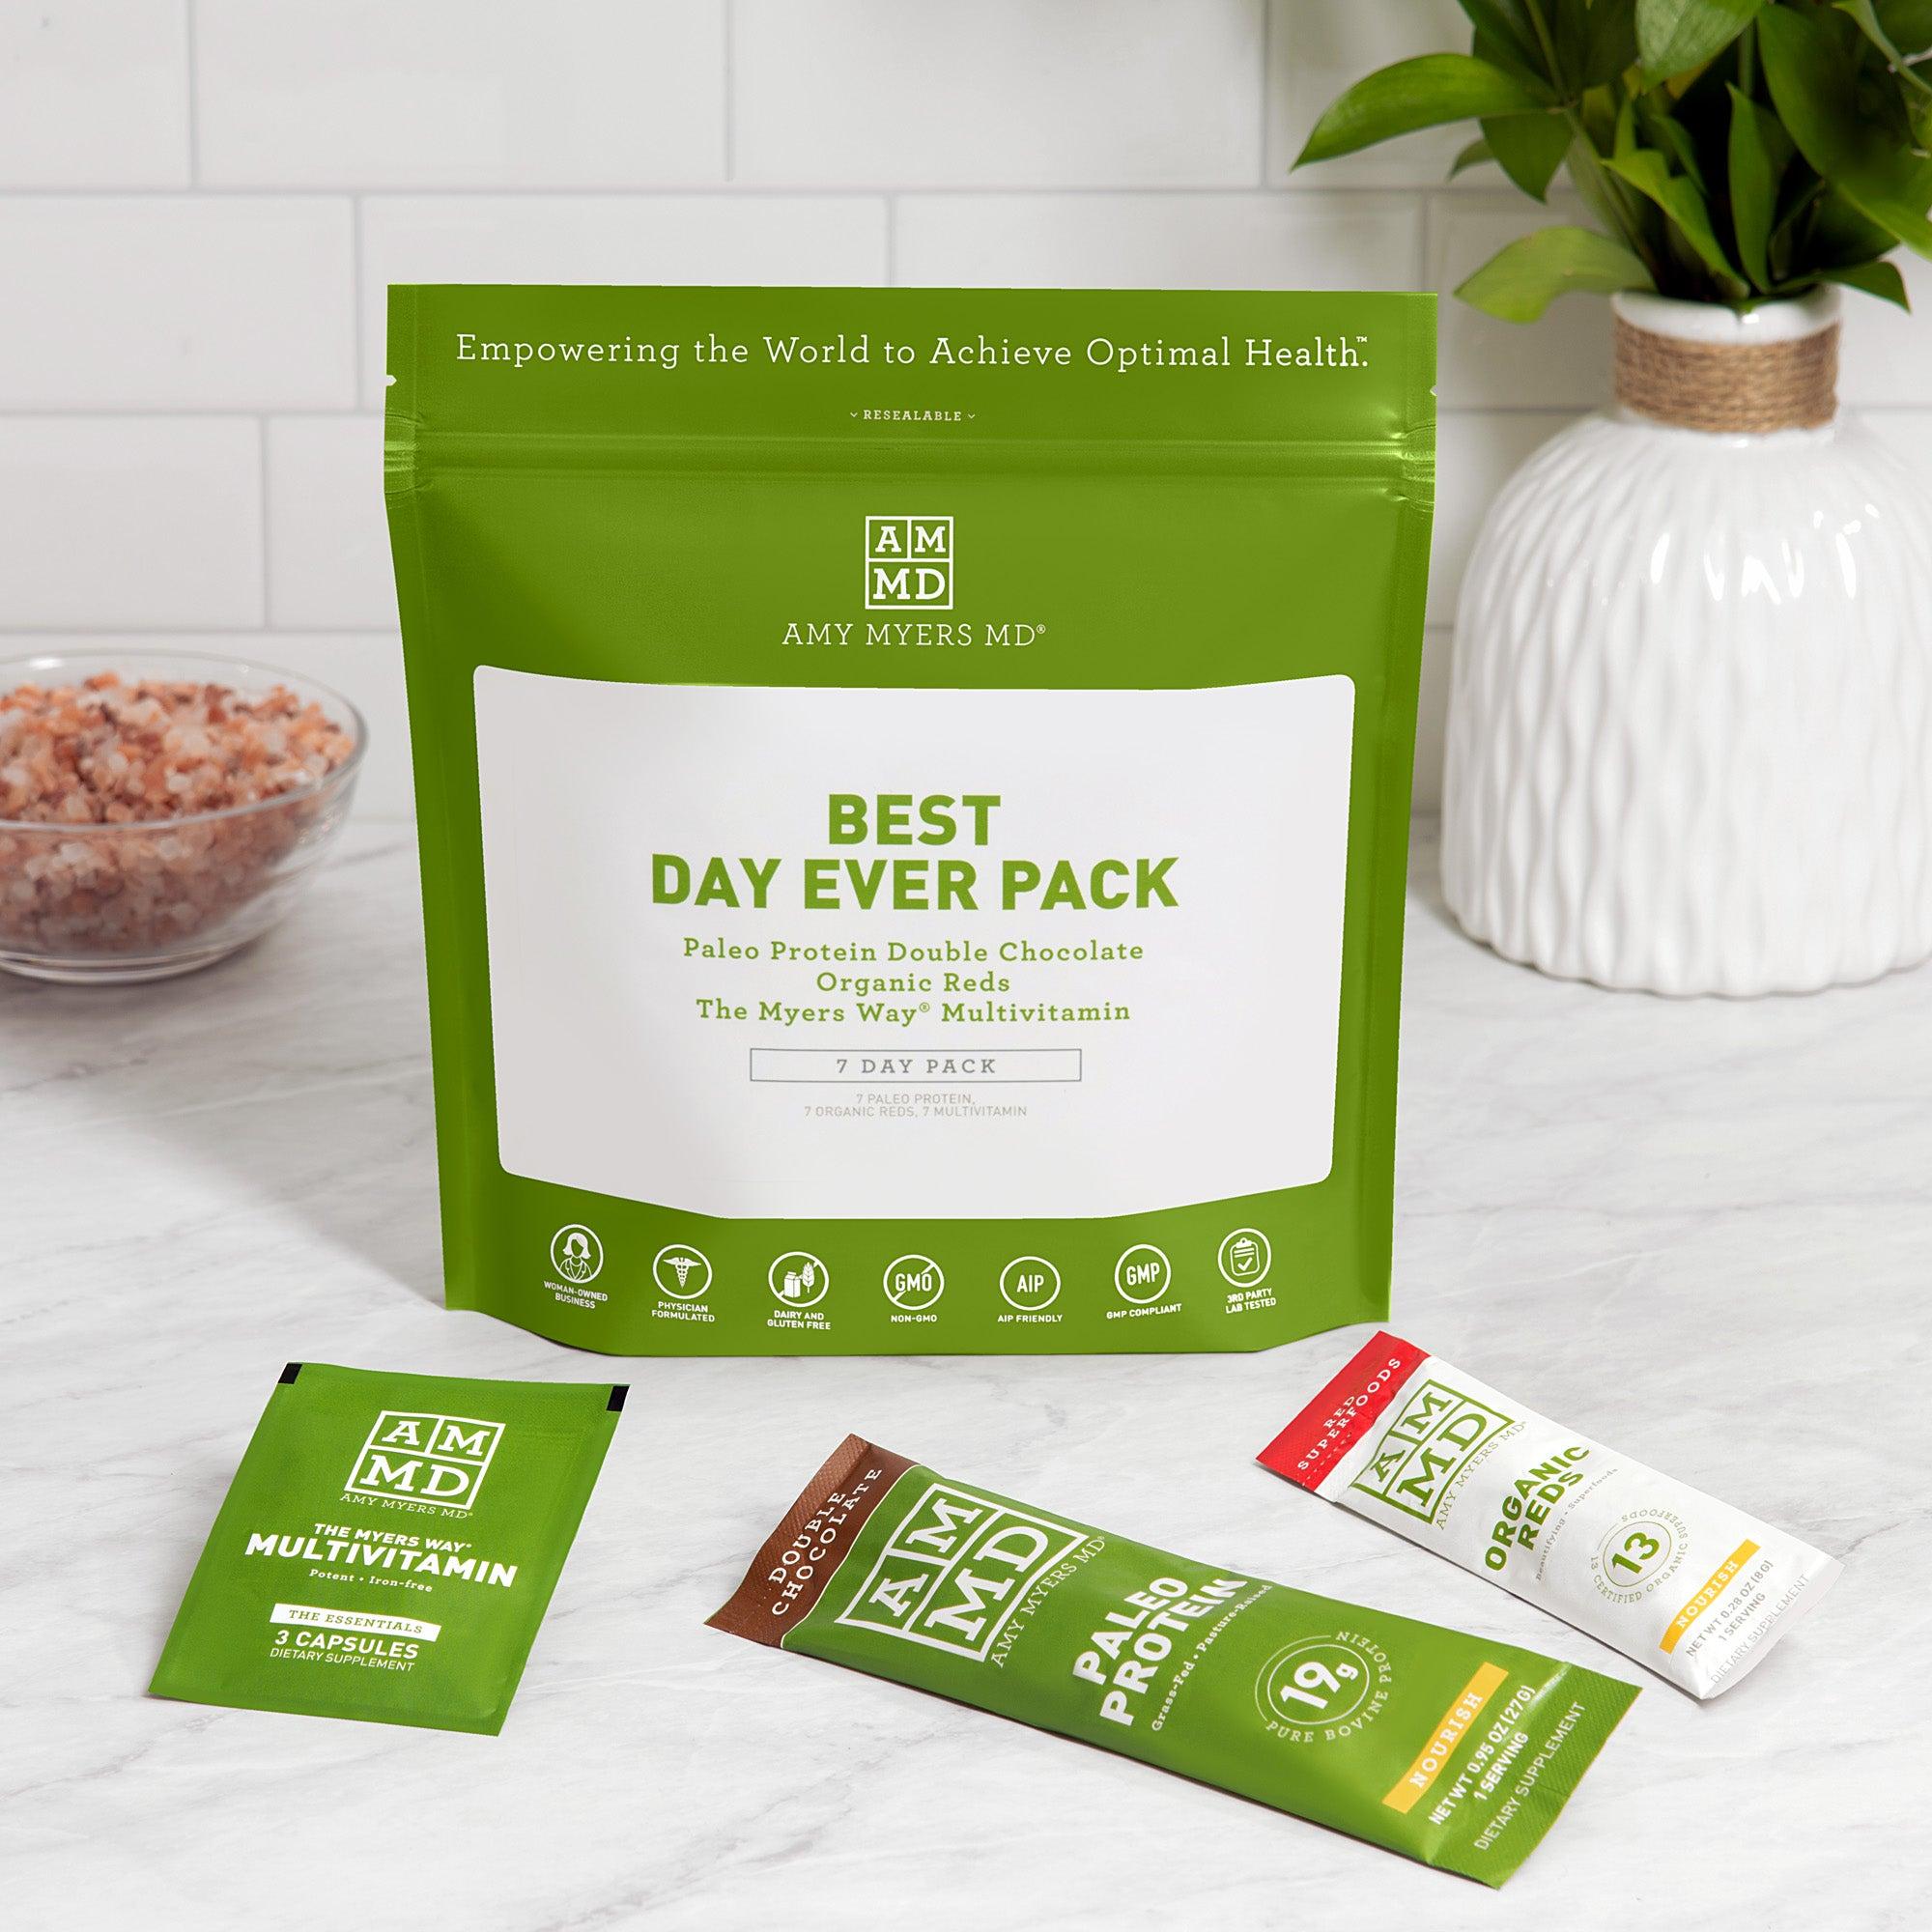 A pouch of the Best Day Ever Pack with individual single serve packets of Paleo Protein Double Chocolate, Organic reds, and The Myers Way® Mutlivitamin - Featured Product Image - Amy Myers MD